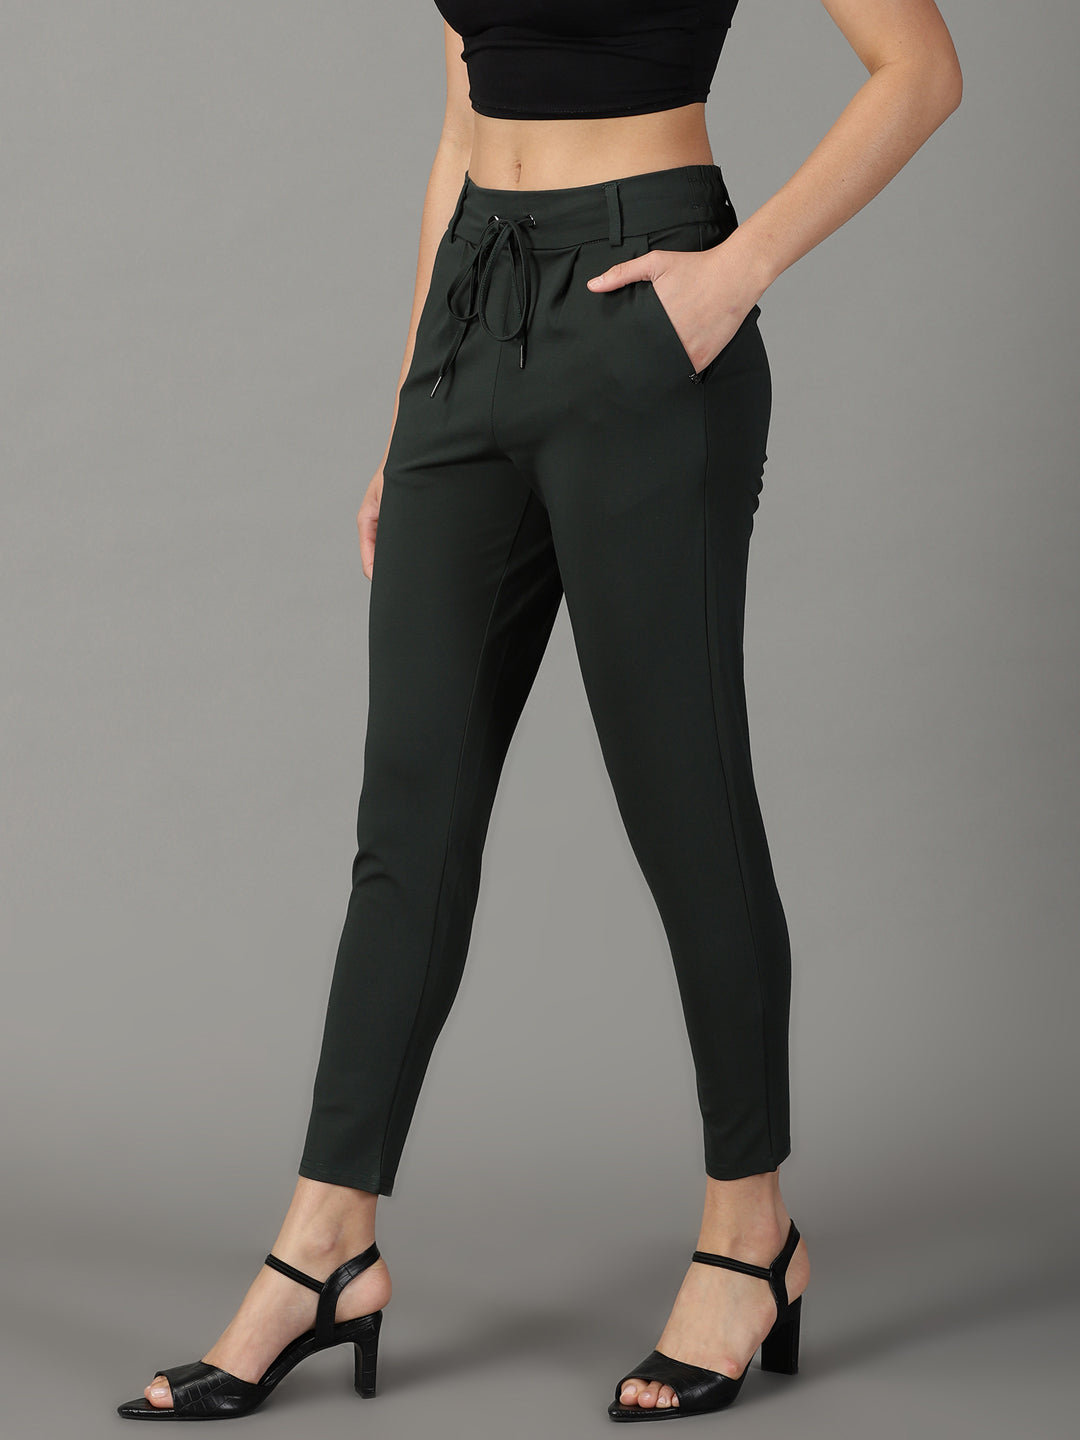 Women's Green Solid Track Pant